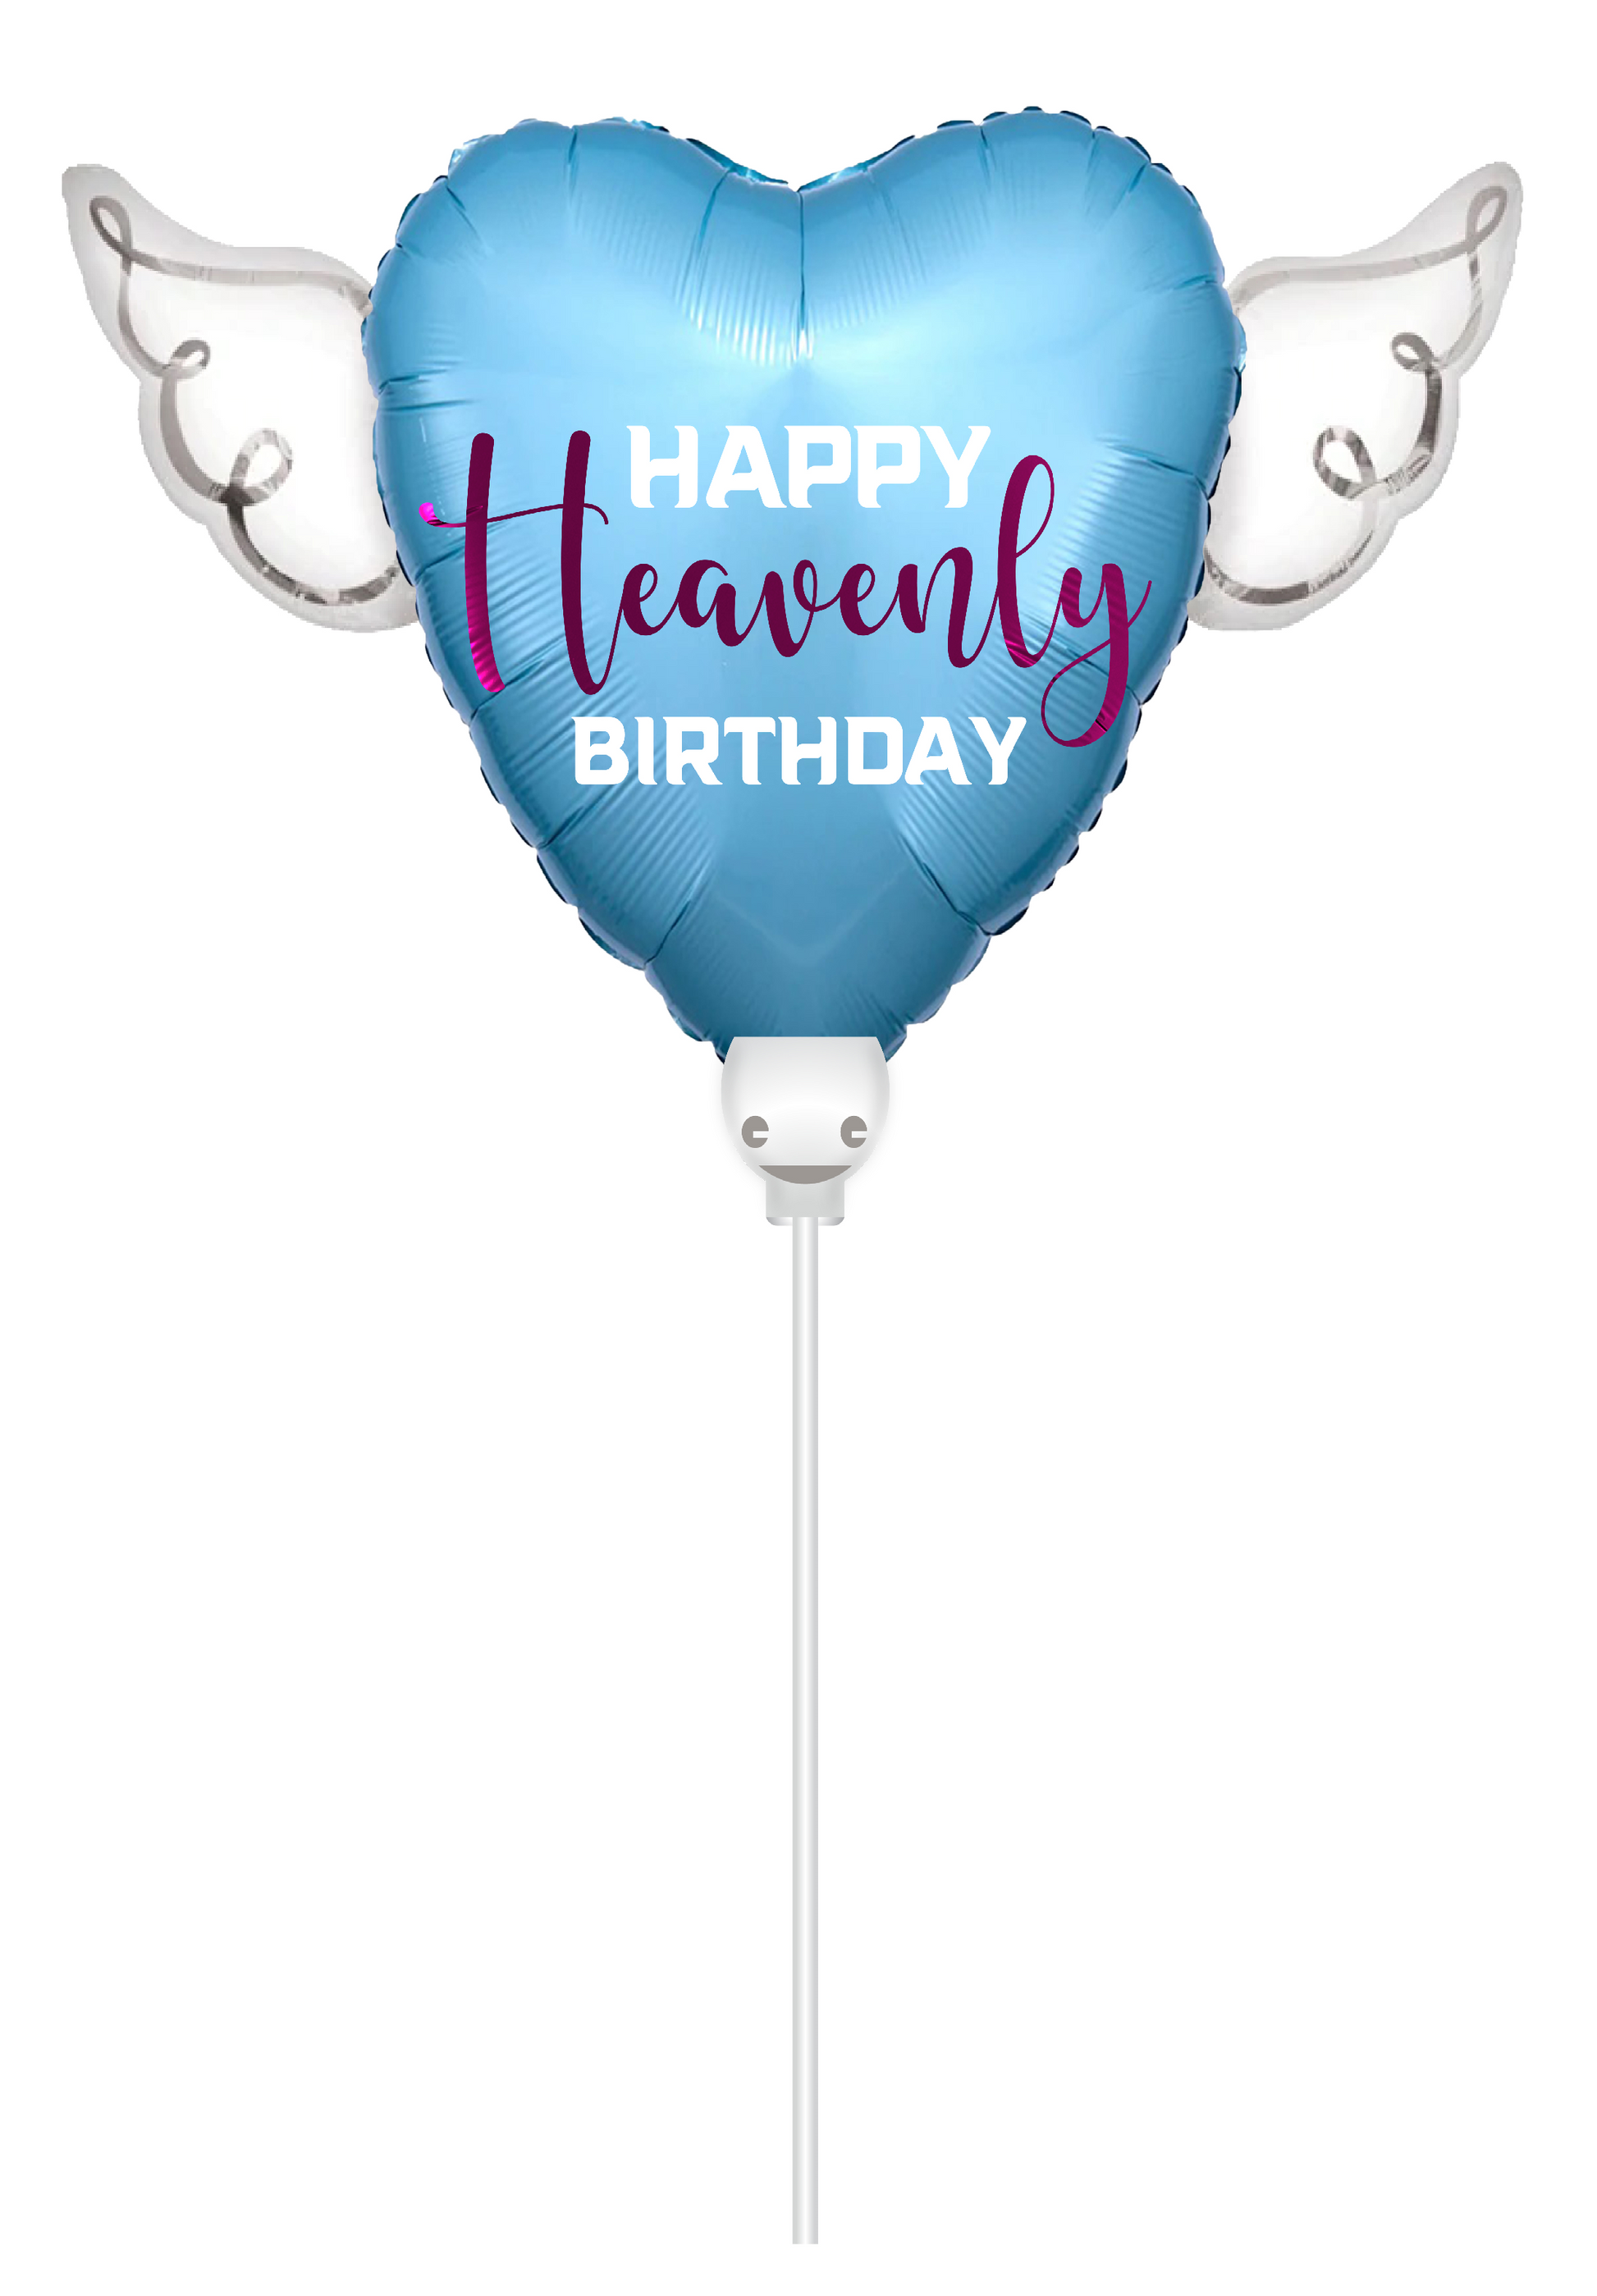 Heavenly Balloons ™ on a Stick Happy HEAVENLY BIRTHDAY blue/purple heart shaped with angel wings